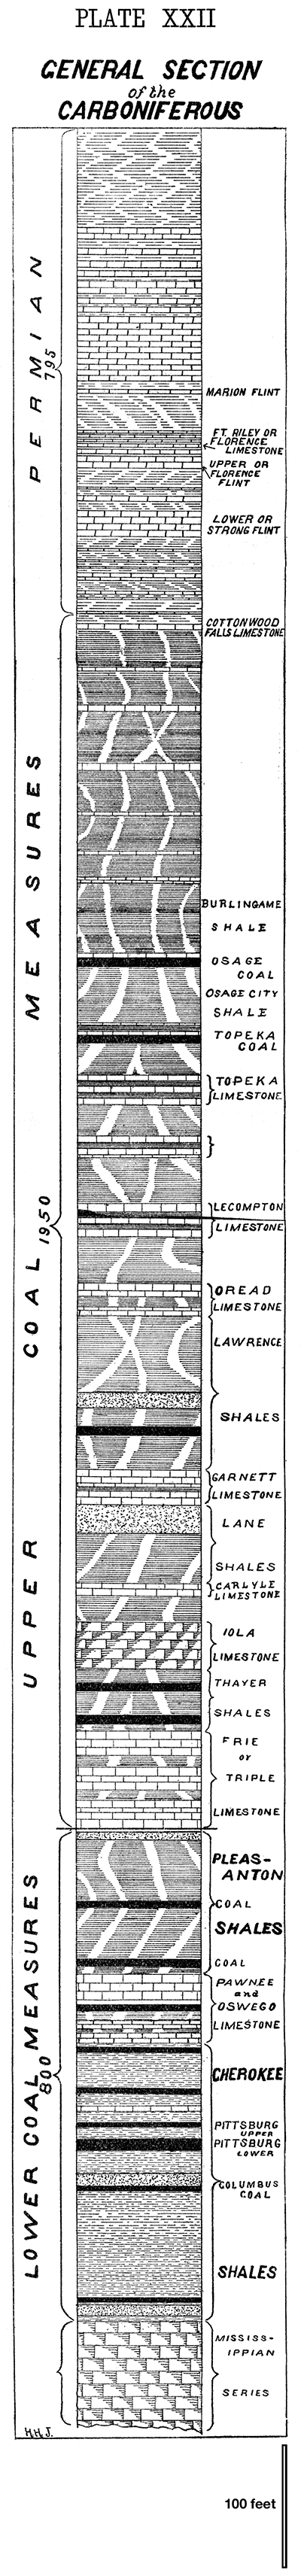 Generalized section of the Carboniferous, from the Mississippian to the top of the Permian.